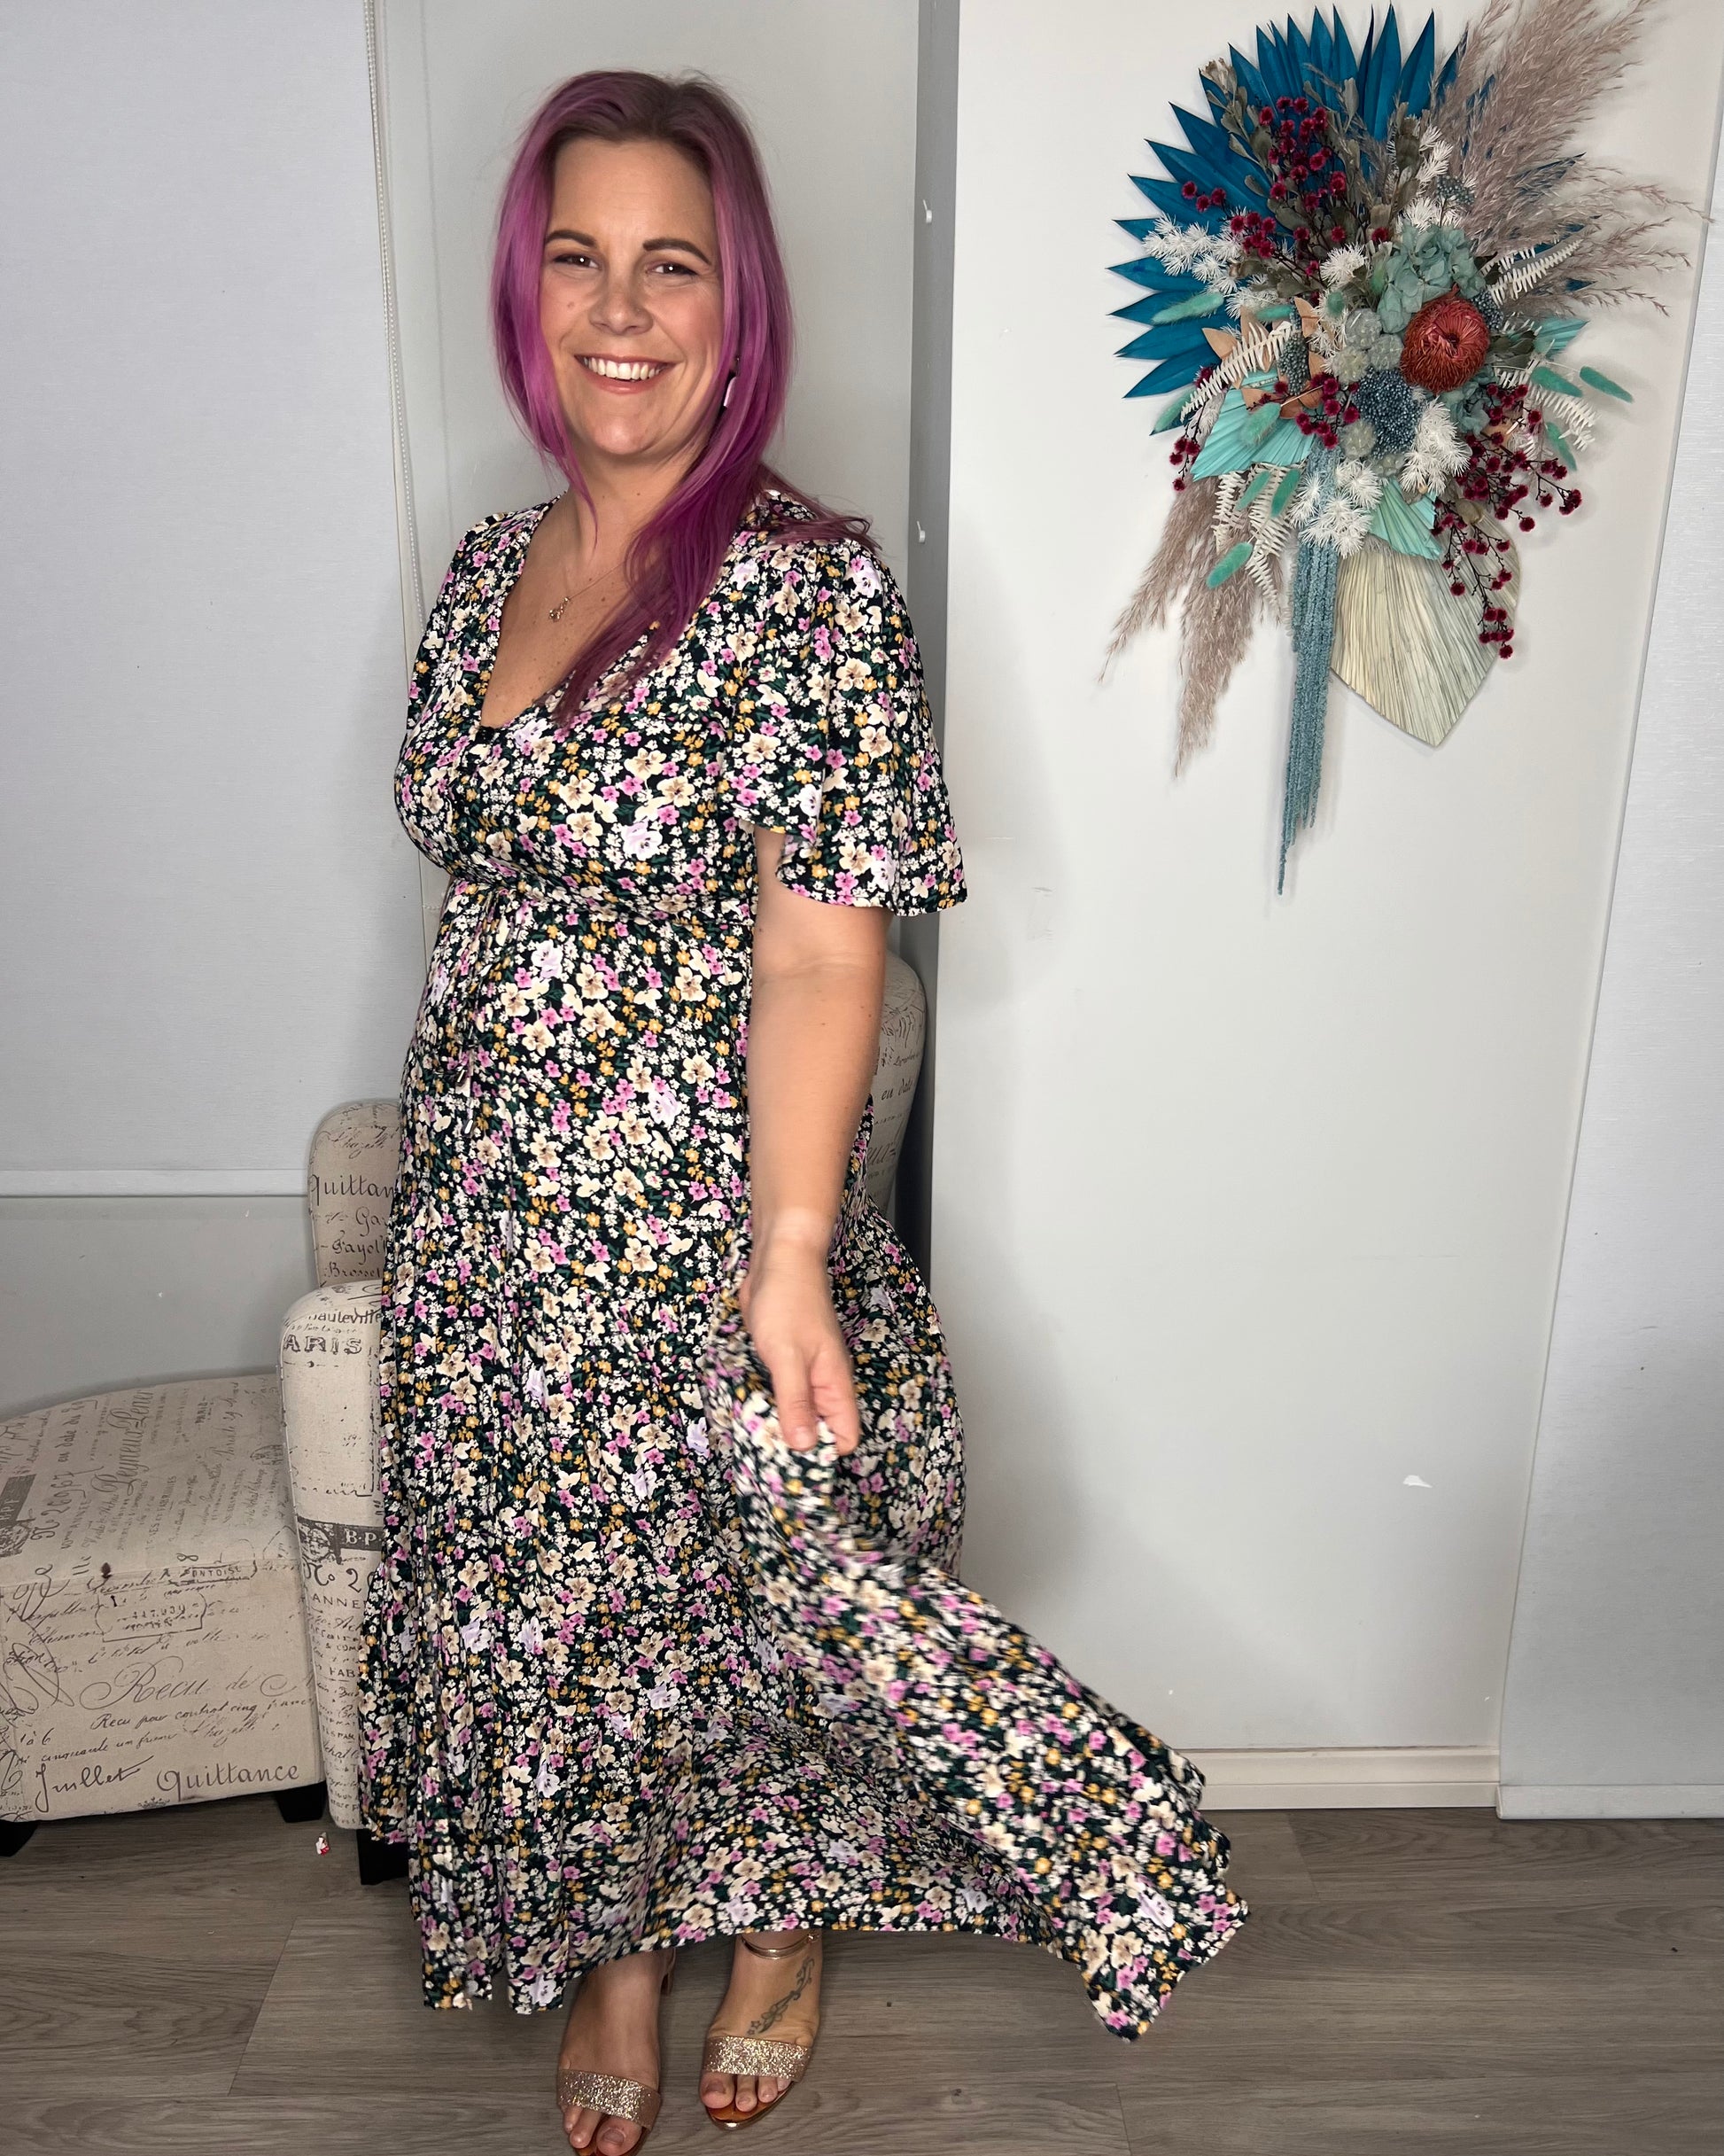 Libby Dress: The Libby Dress comes in one of our most popular cuts with a button down bust, flutter sleeves and a flowy skirt
Features:

Button’s at bust - breastfeeding friendly - Ciao Bella Dresses 